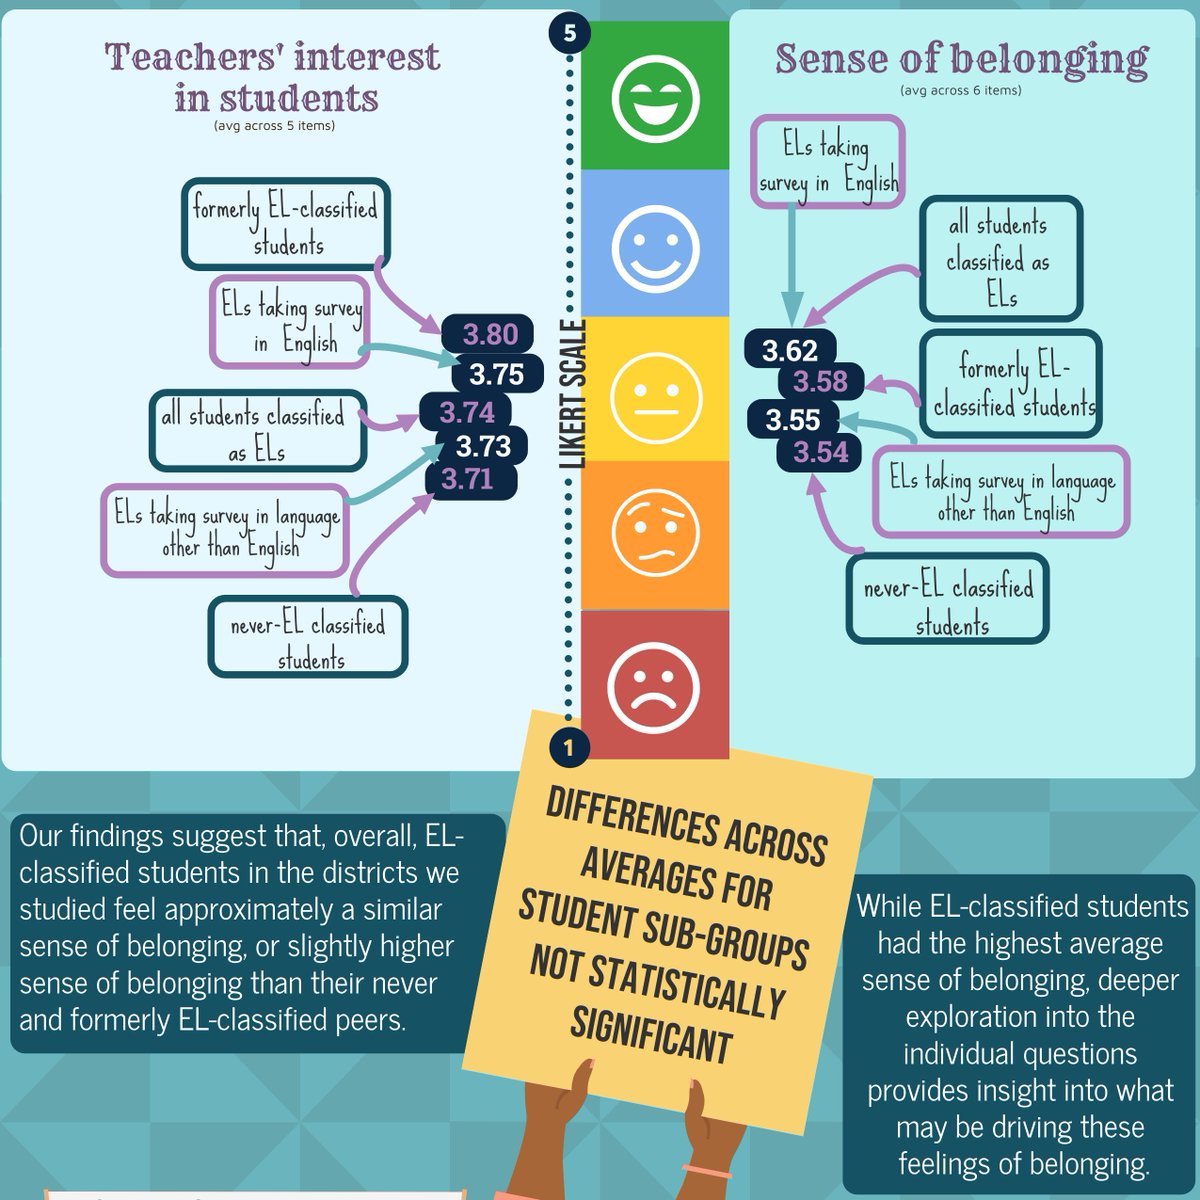 📌New piece in @AeraOpen w @Edu_Historian & @MaddyMavro on variation in belongingness based on students' English learner classification status & survey language students chose

Check out study details & key findings by visiting infographic link
👇🏽👇🏽👇🏽👇🏽
infograph.venngage.com/pl/vm3yHBkvrw